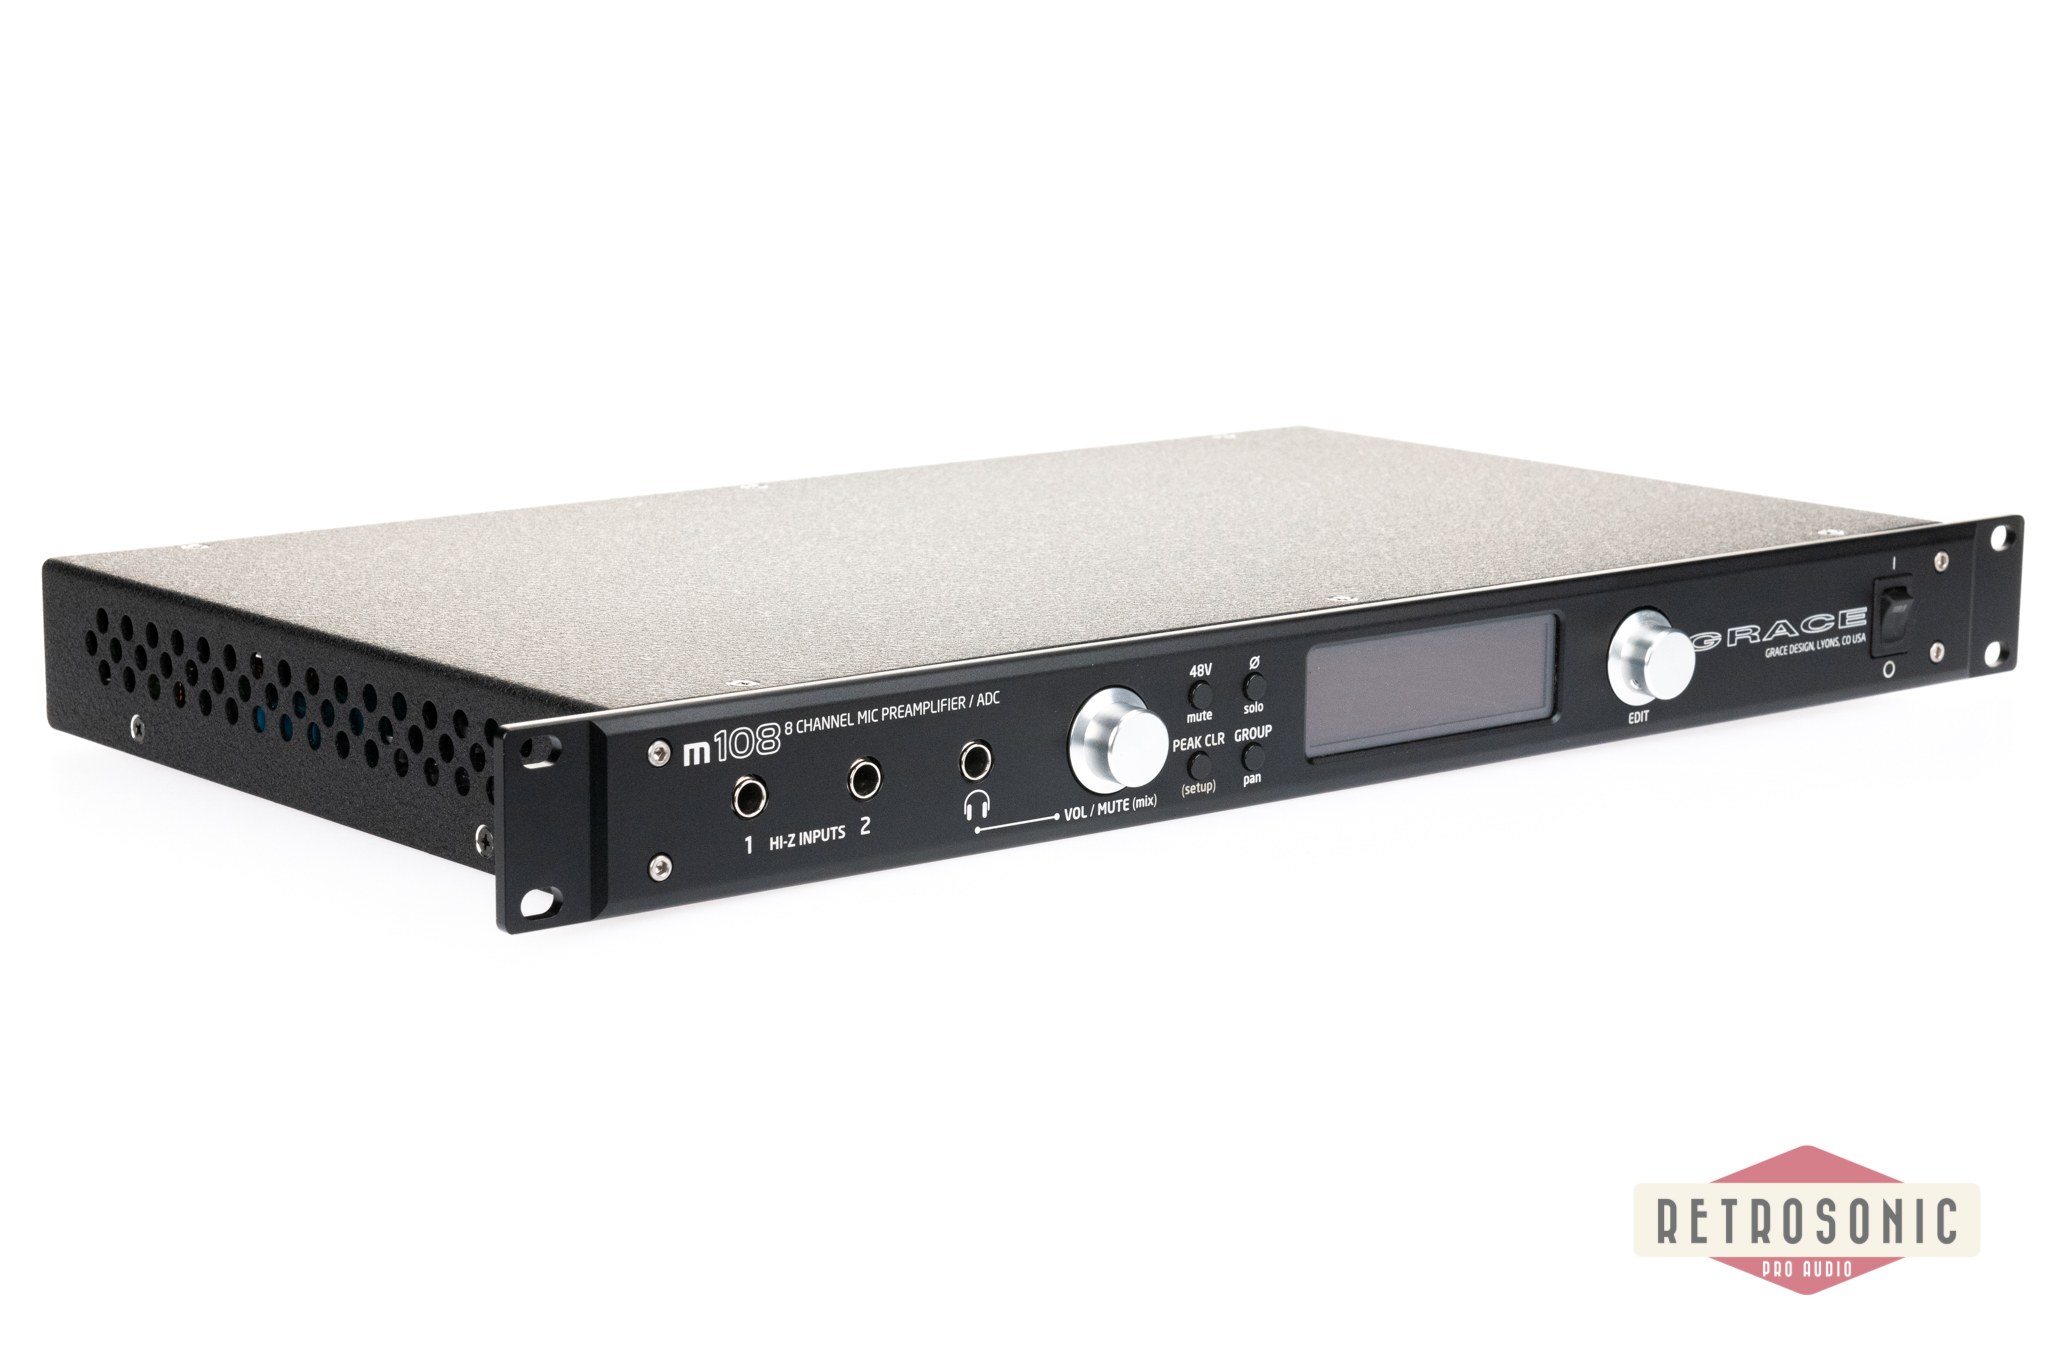 Grace Design m108 8-channel Microphone Preamplifier / ADC